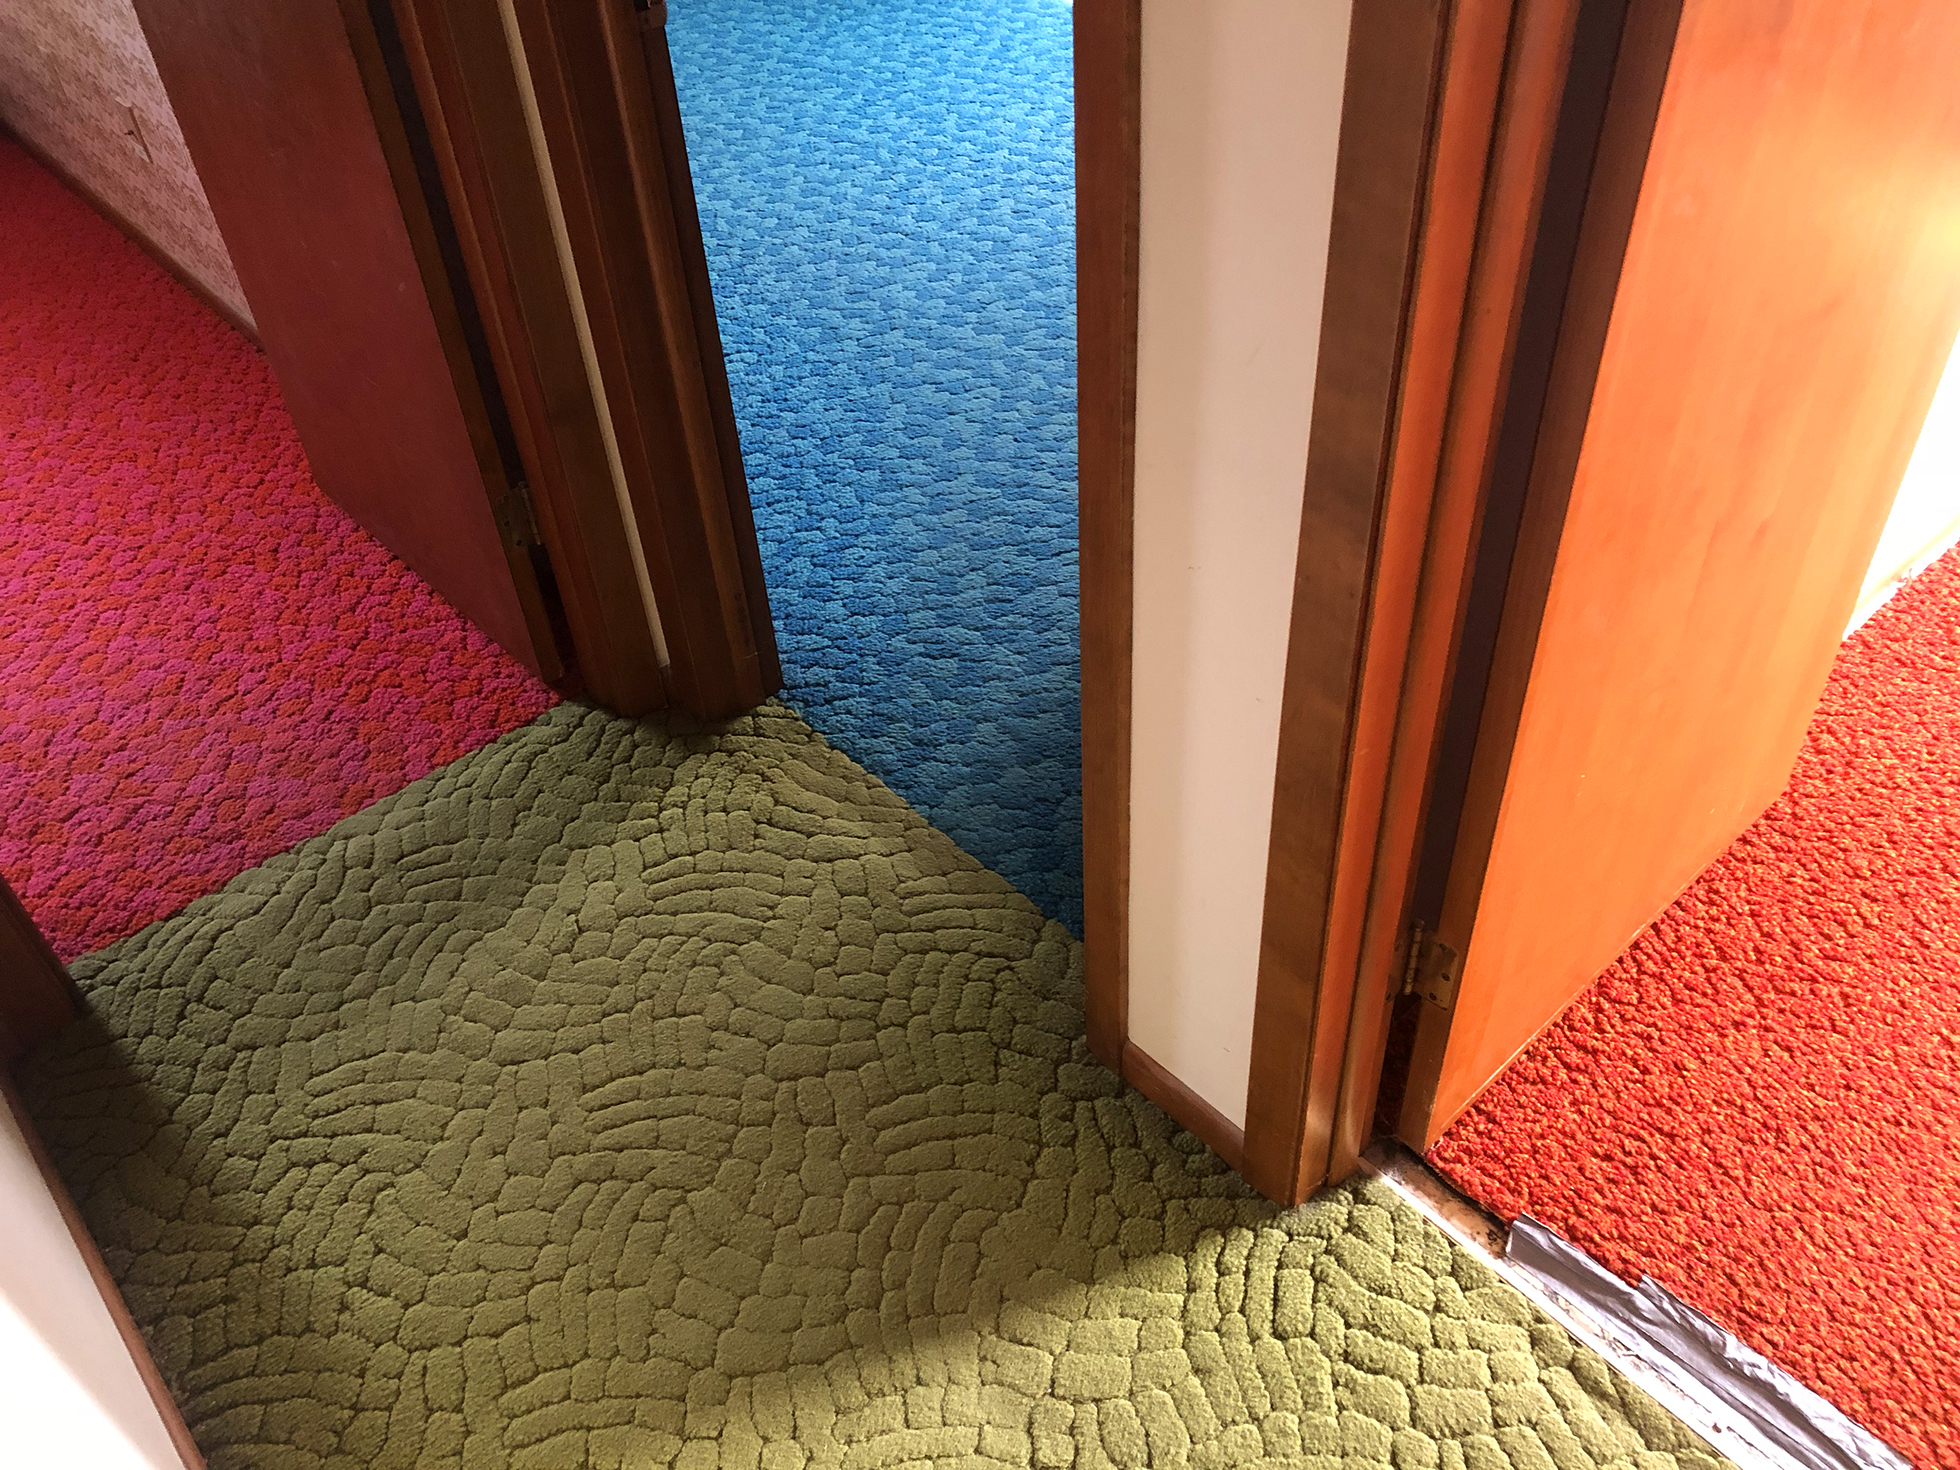 Multiple carpets in retro sixties colors converging